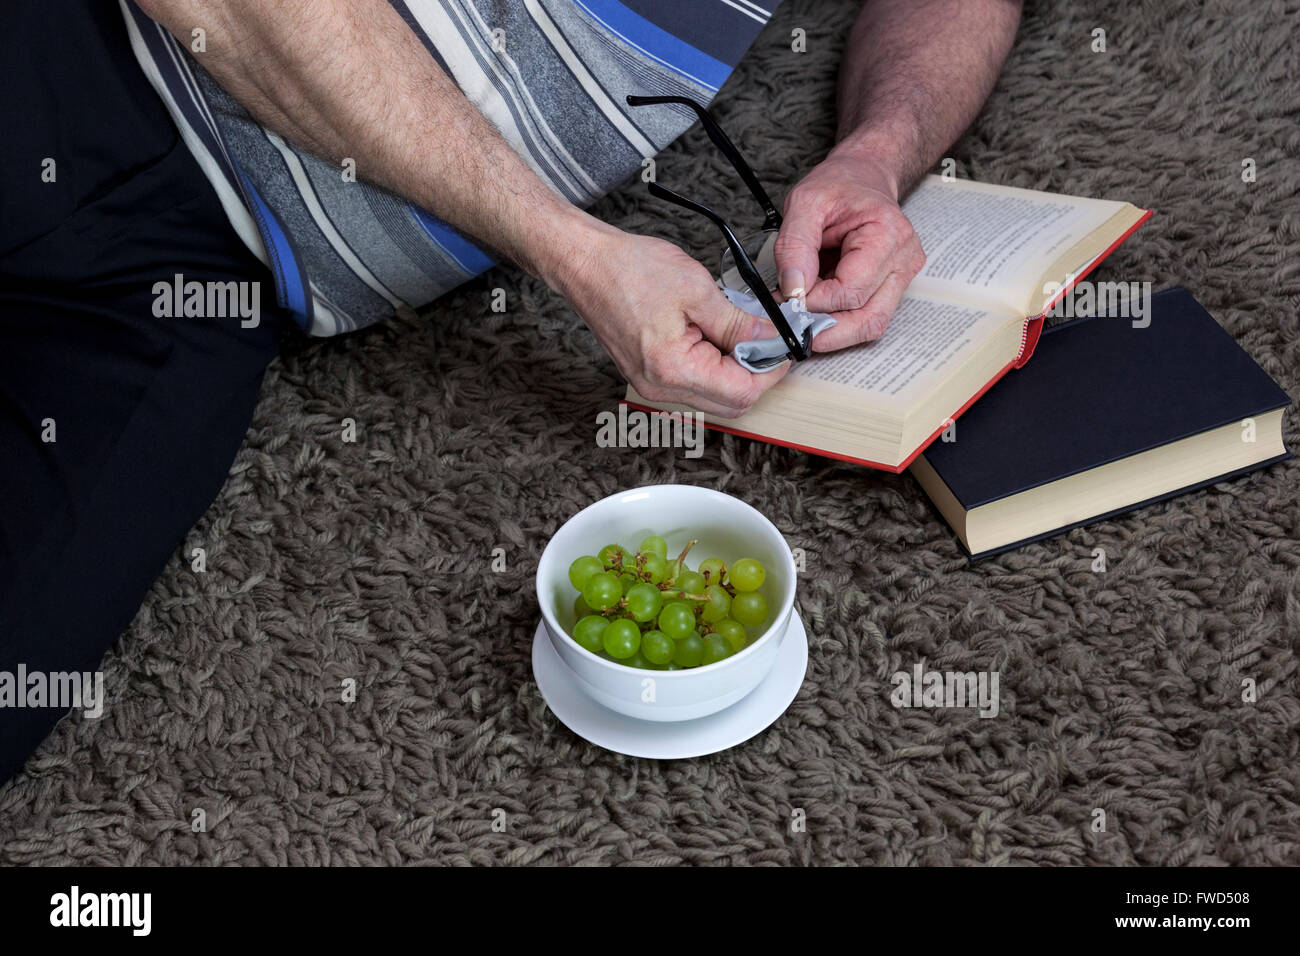 Man laying on a shaggy grey rug cleaning his glasses while reading a red book Stock Photo